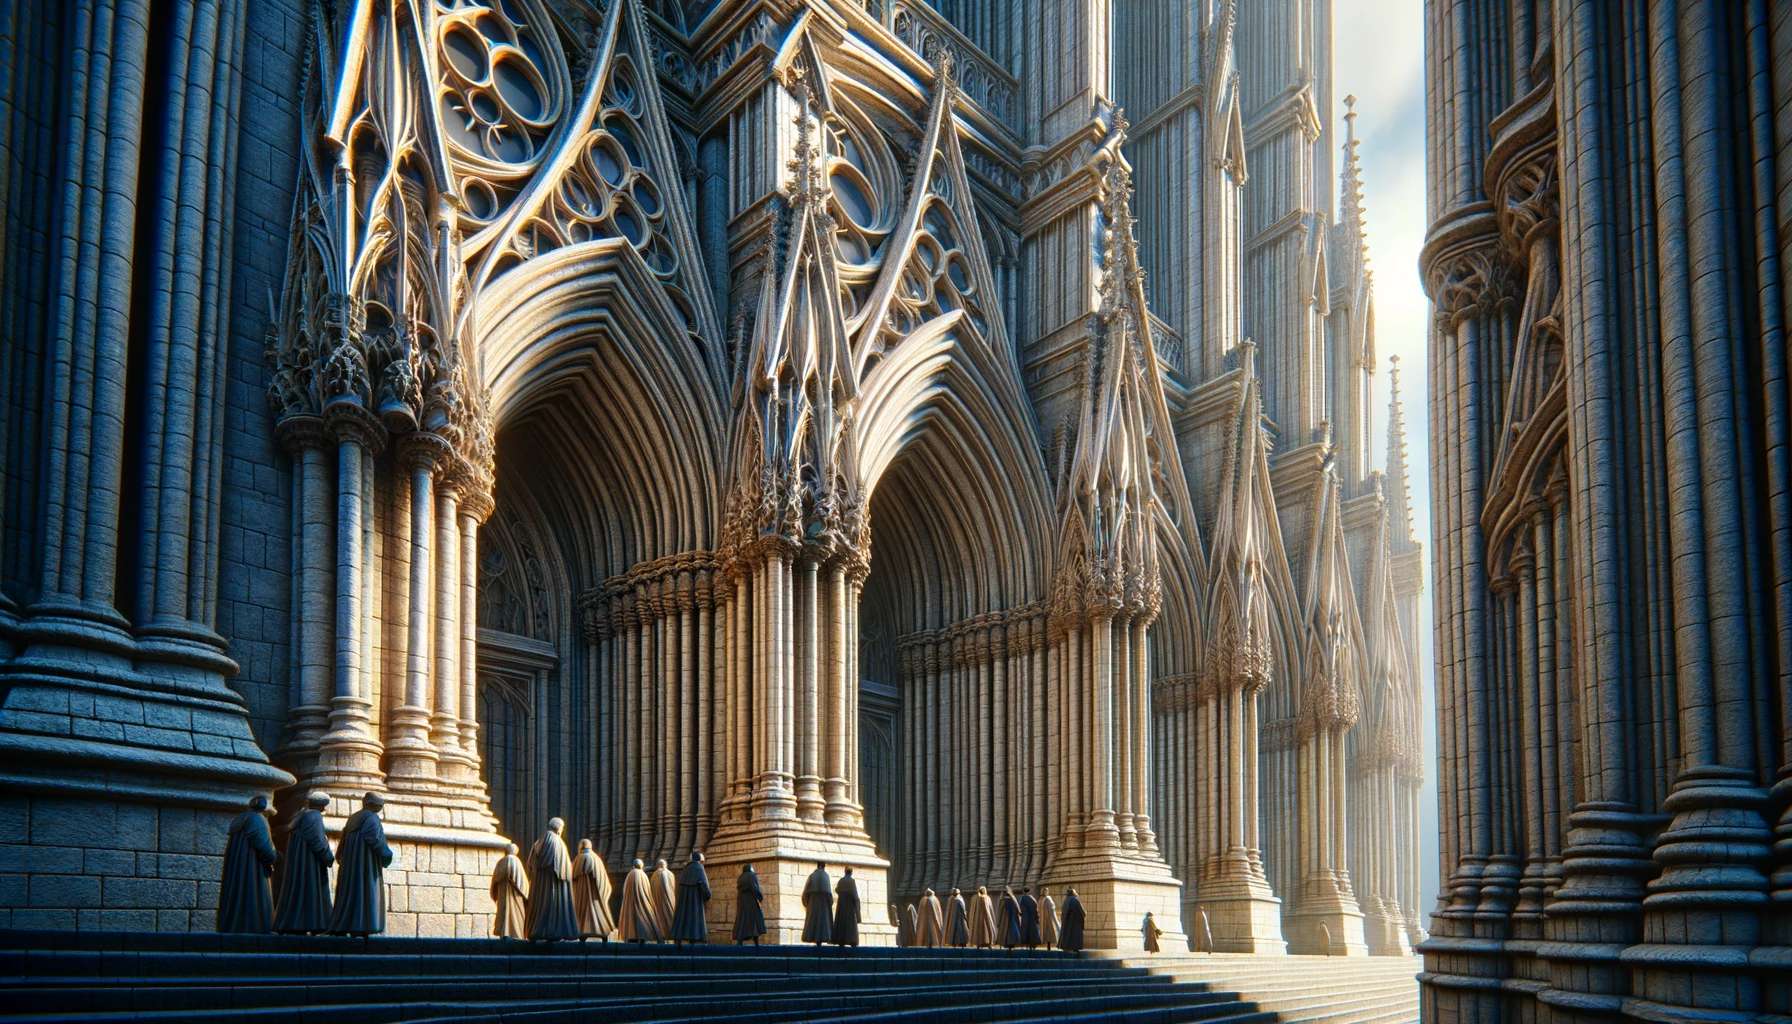 What Are The Main Structural And Stylistic Features Of A Gothic Cathedral?